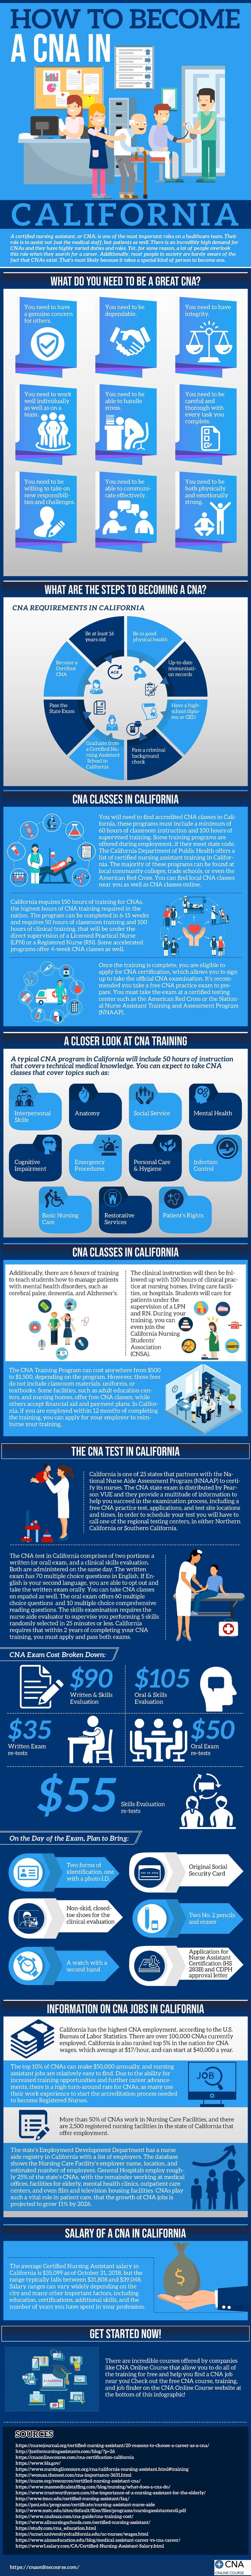 How+to+Become+a+CNA+in+California